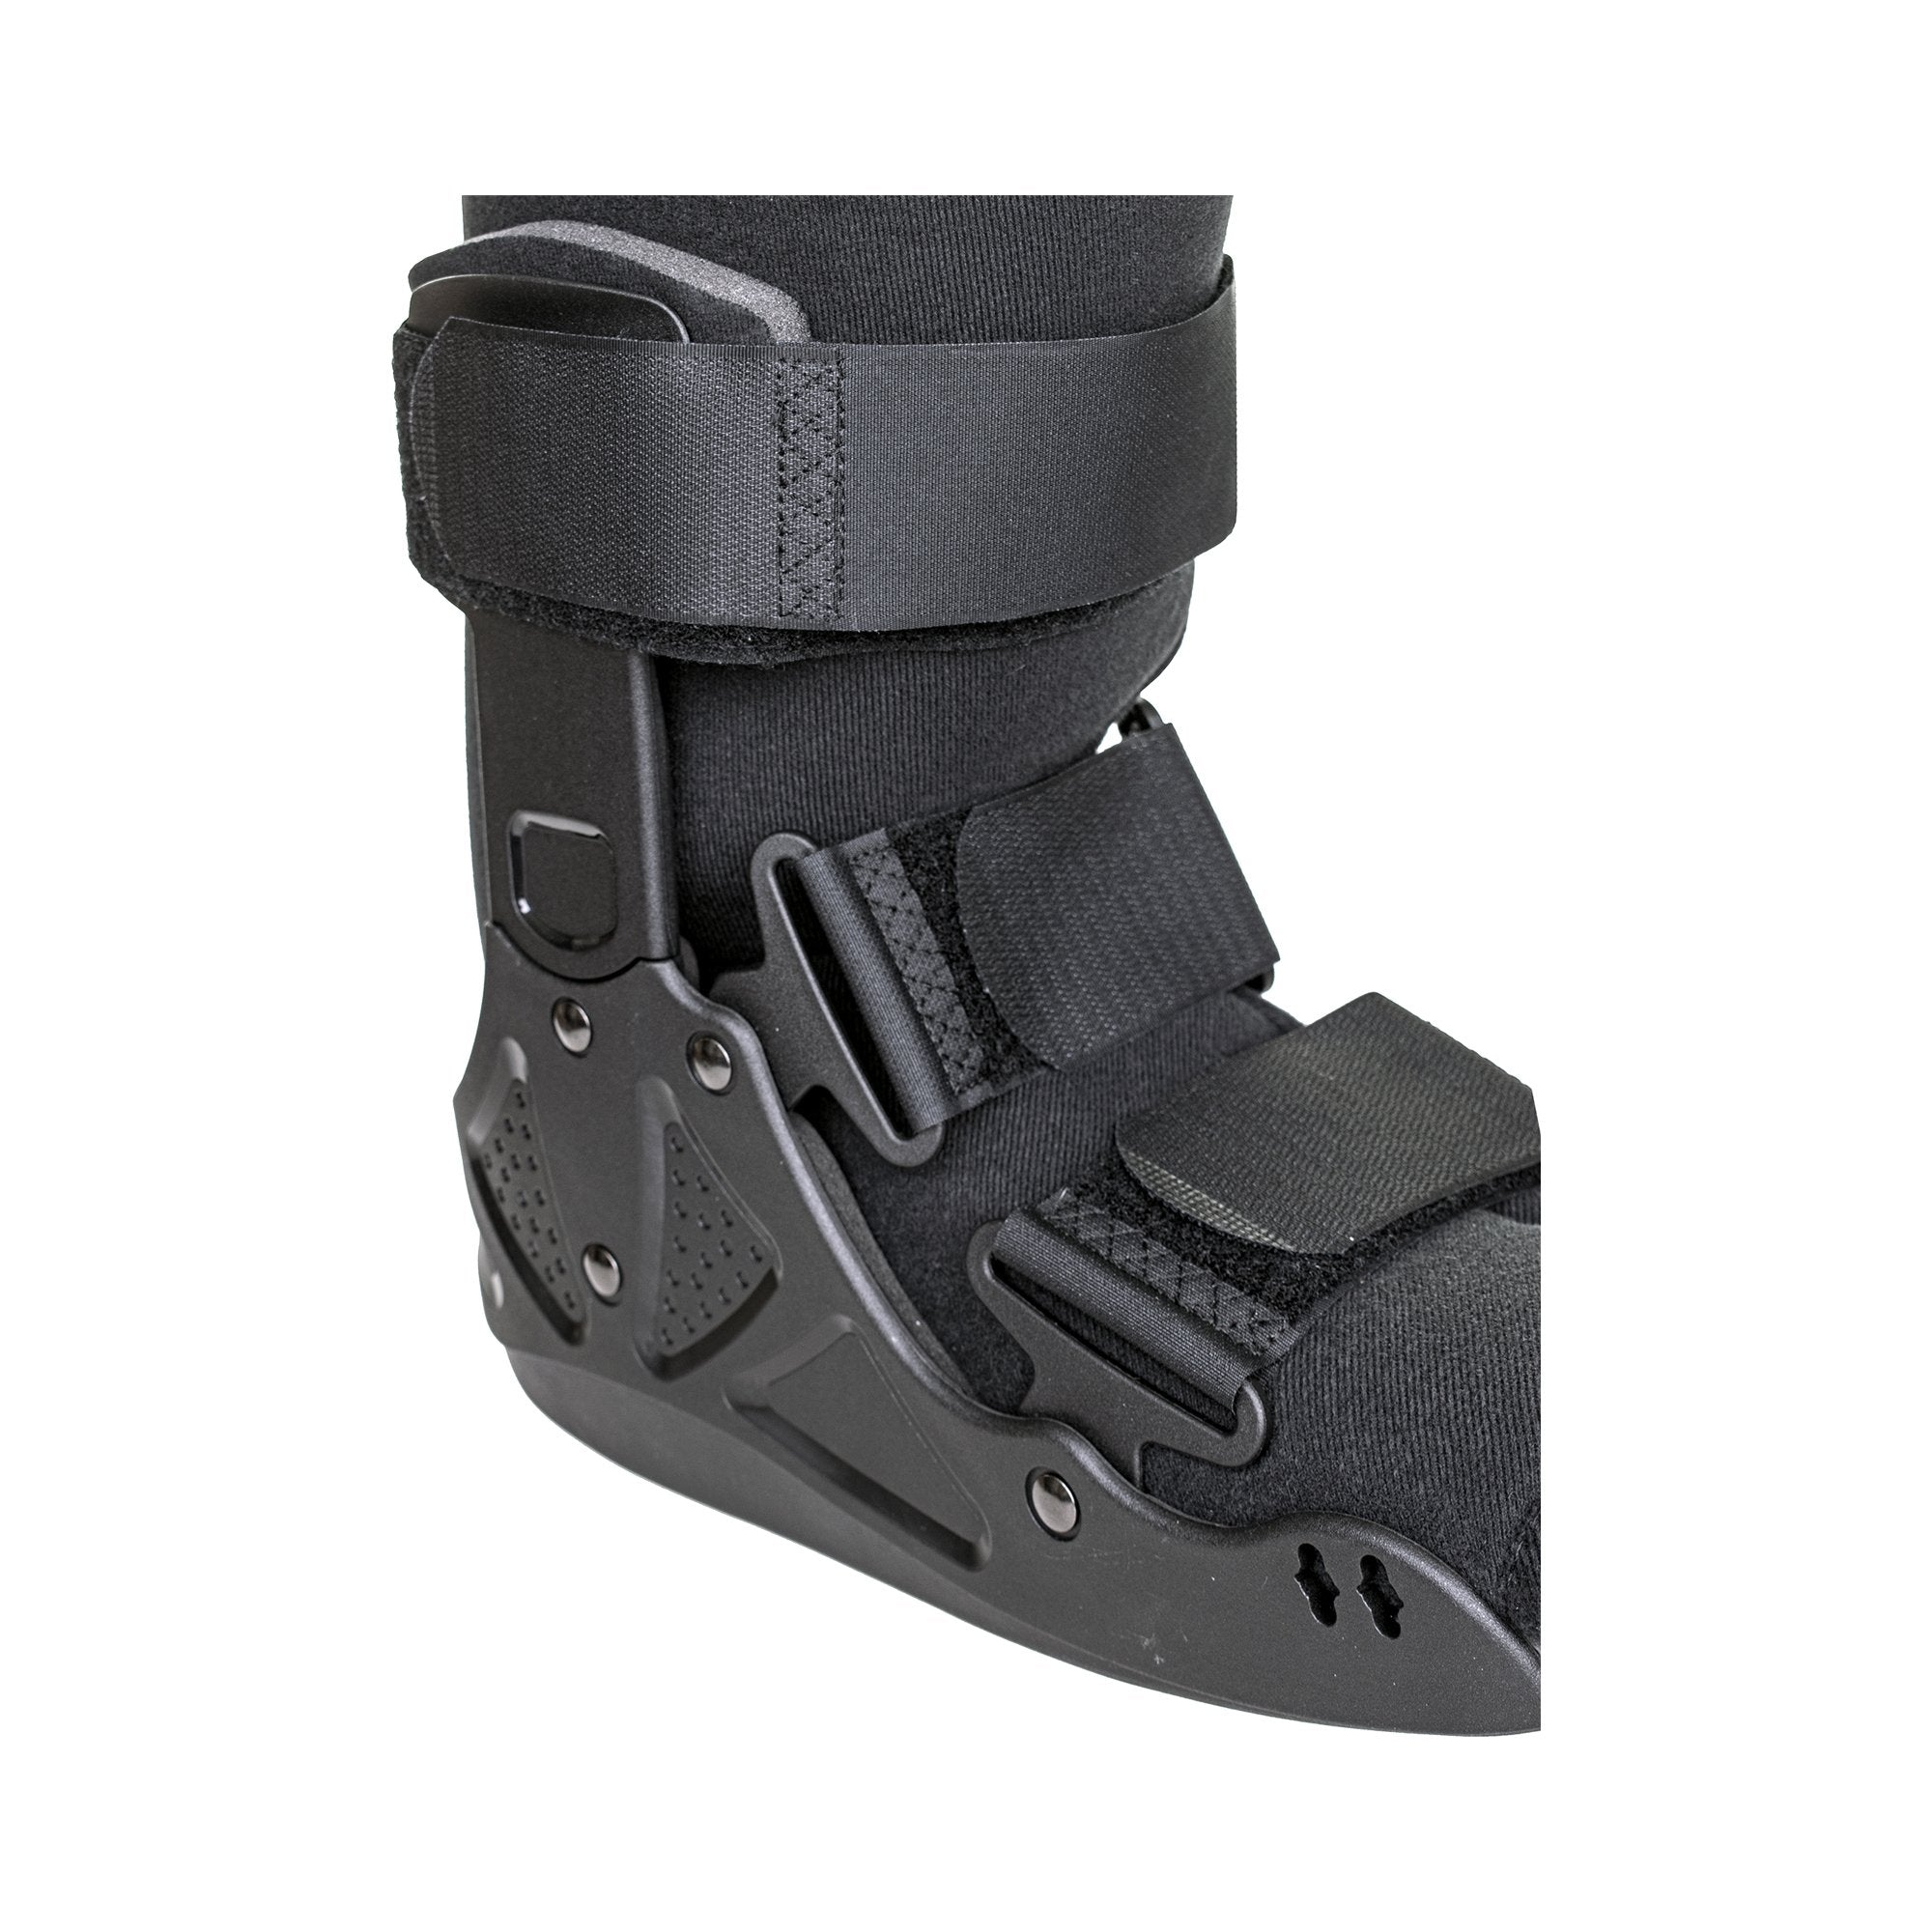 Walker Boot McKesson Non-Pneumatic Large Left or Right Foot Adult